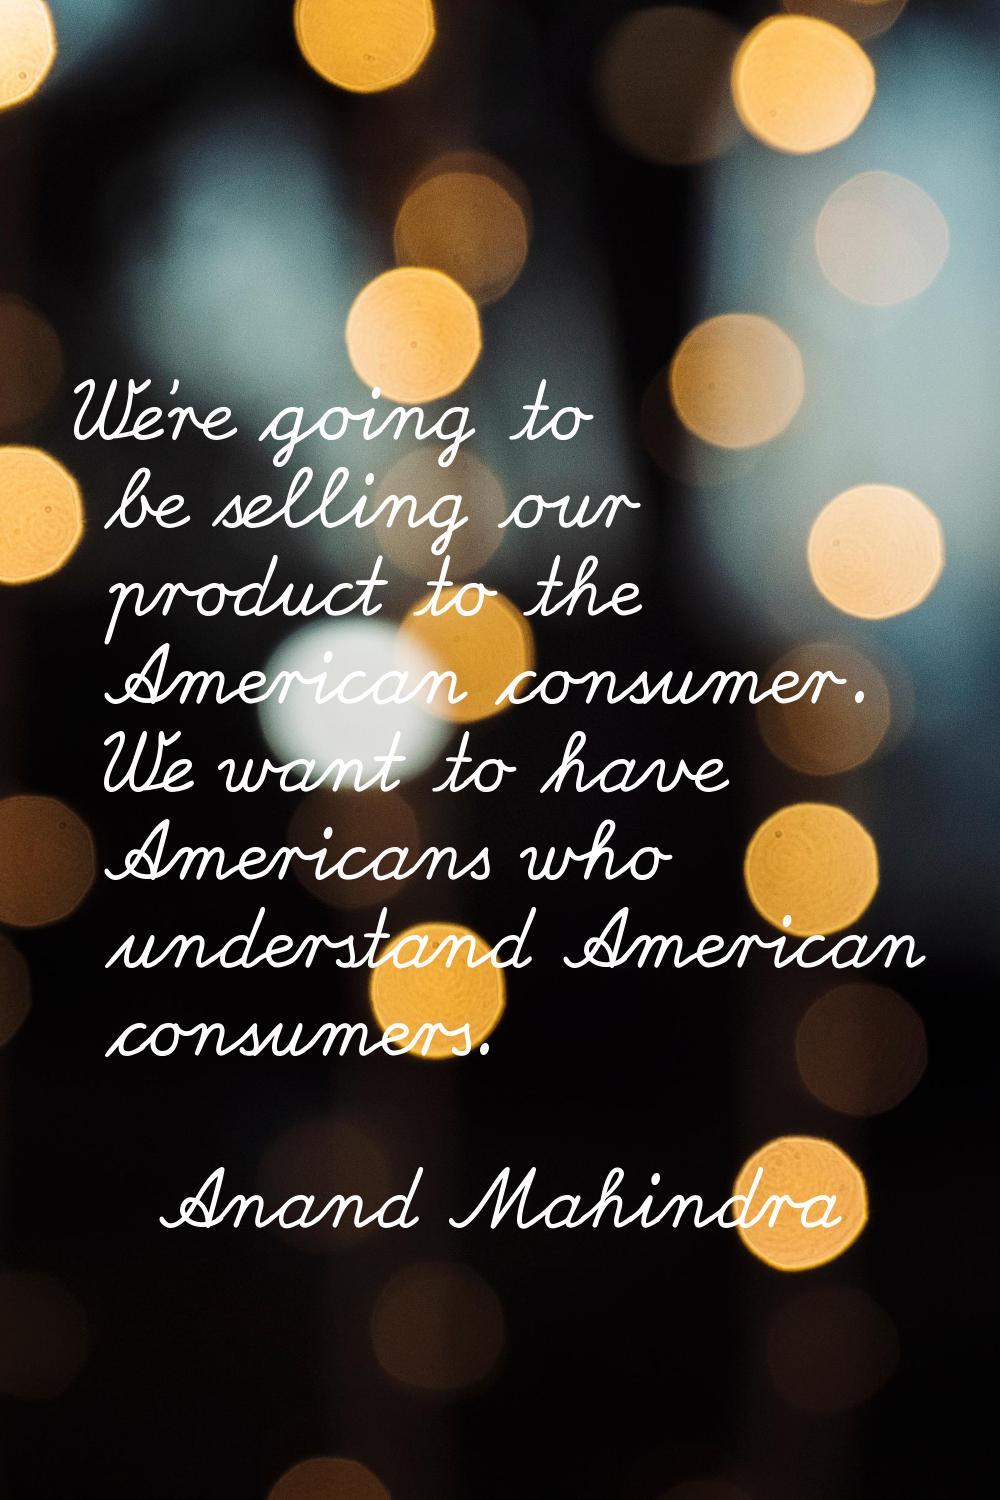 We're going to be selling our product to the American consumer. We want to have Americans who under